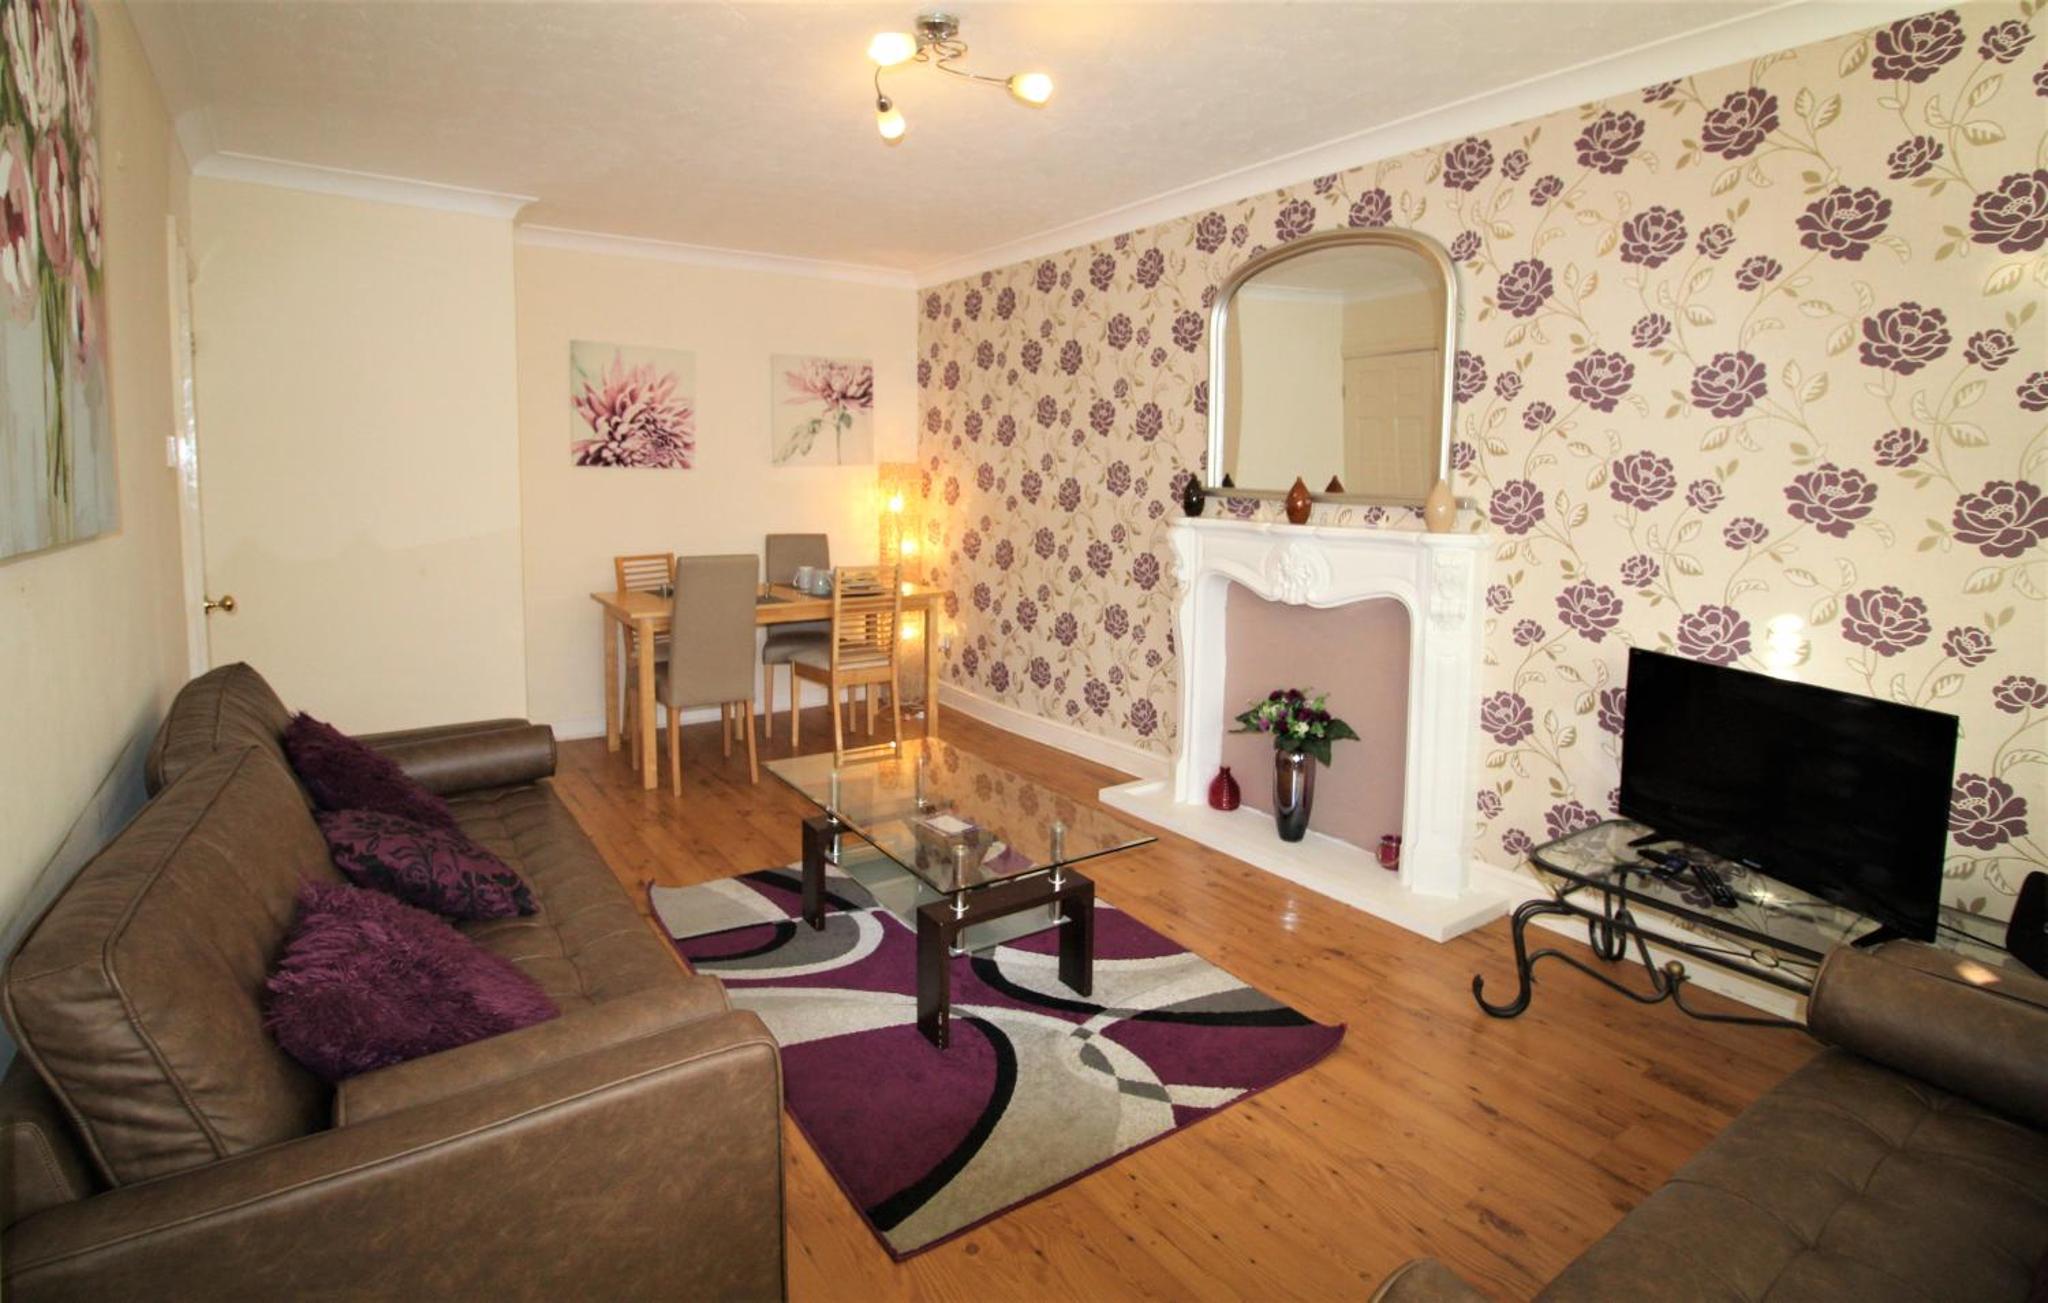 Boswell - Large Balcony Apartment & Parking - 2 Bedrooms - Close to Town & Racecourse